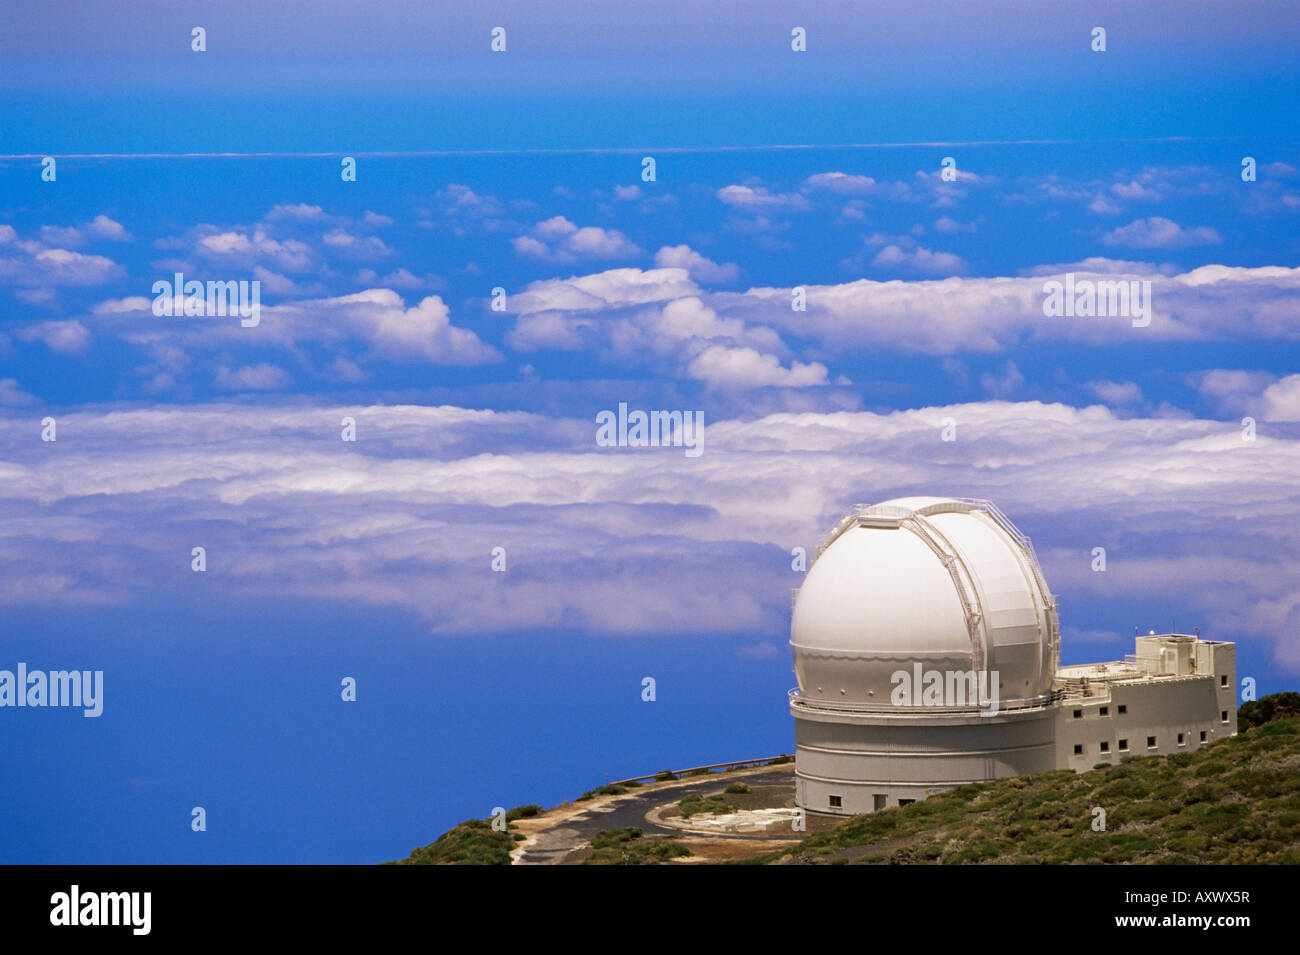 Astrophysic observatory situated near Roque de los Muchachos, La Palma, Canary Islands, Spain, Atlantic, Europe Stock Photo